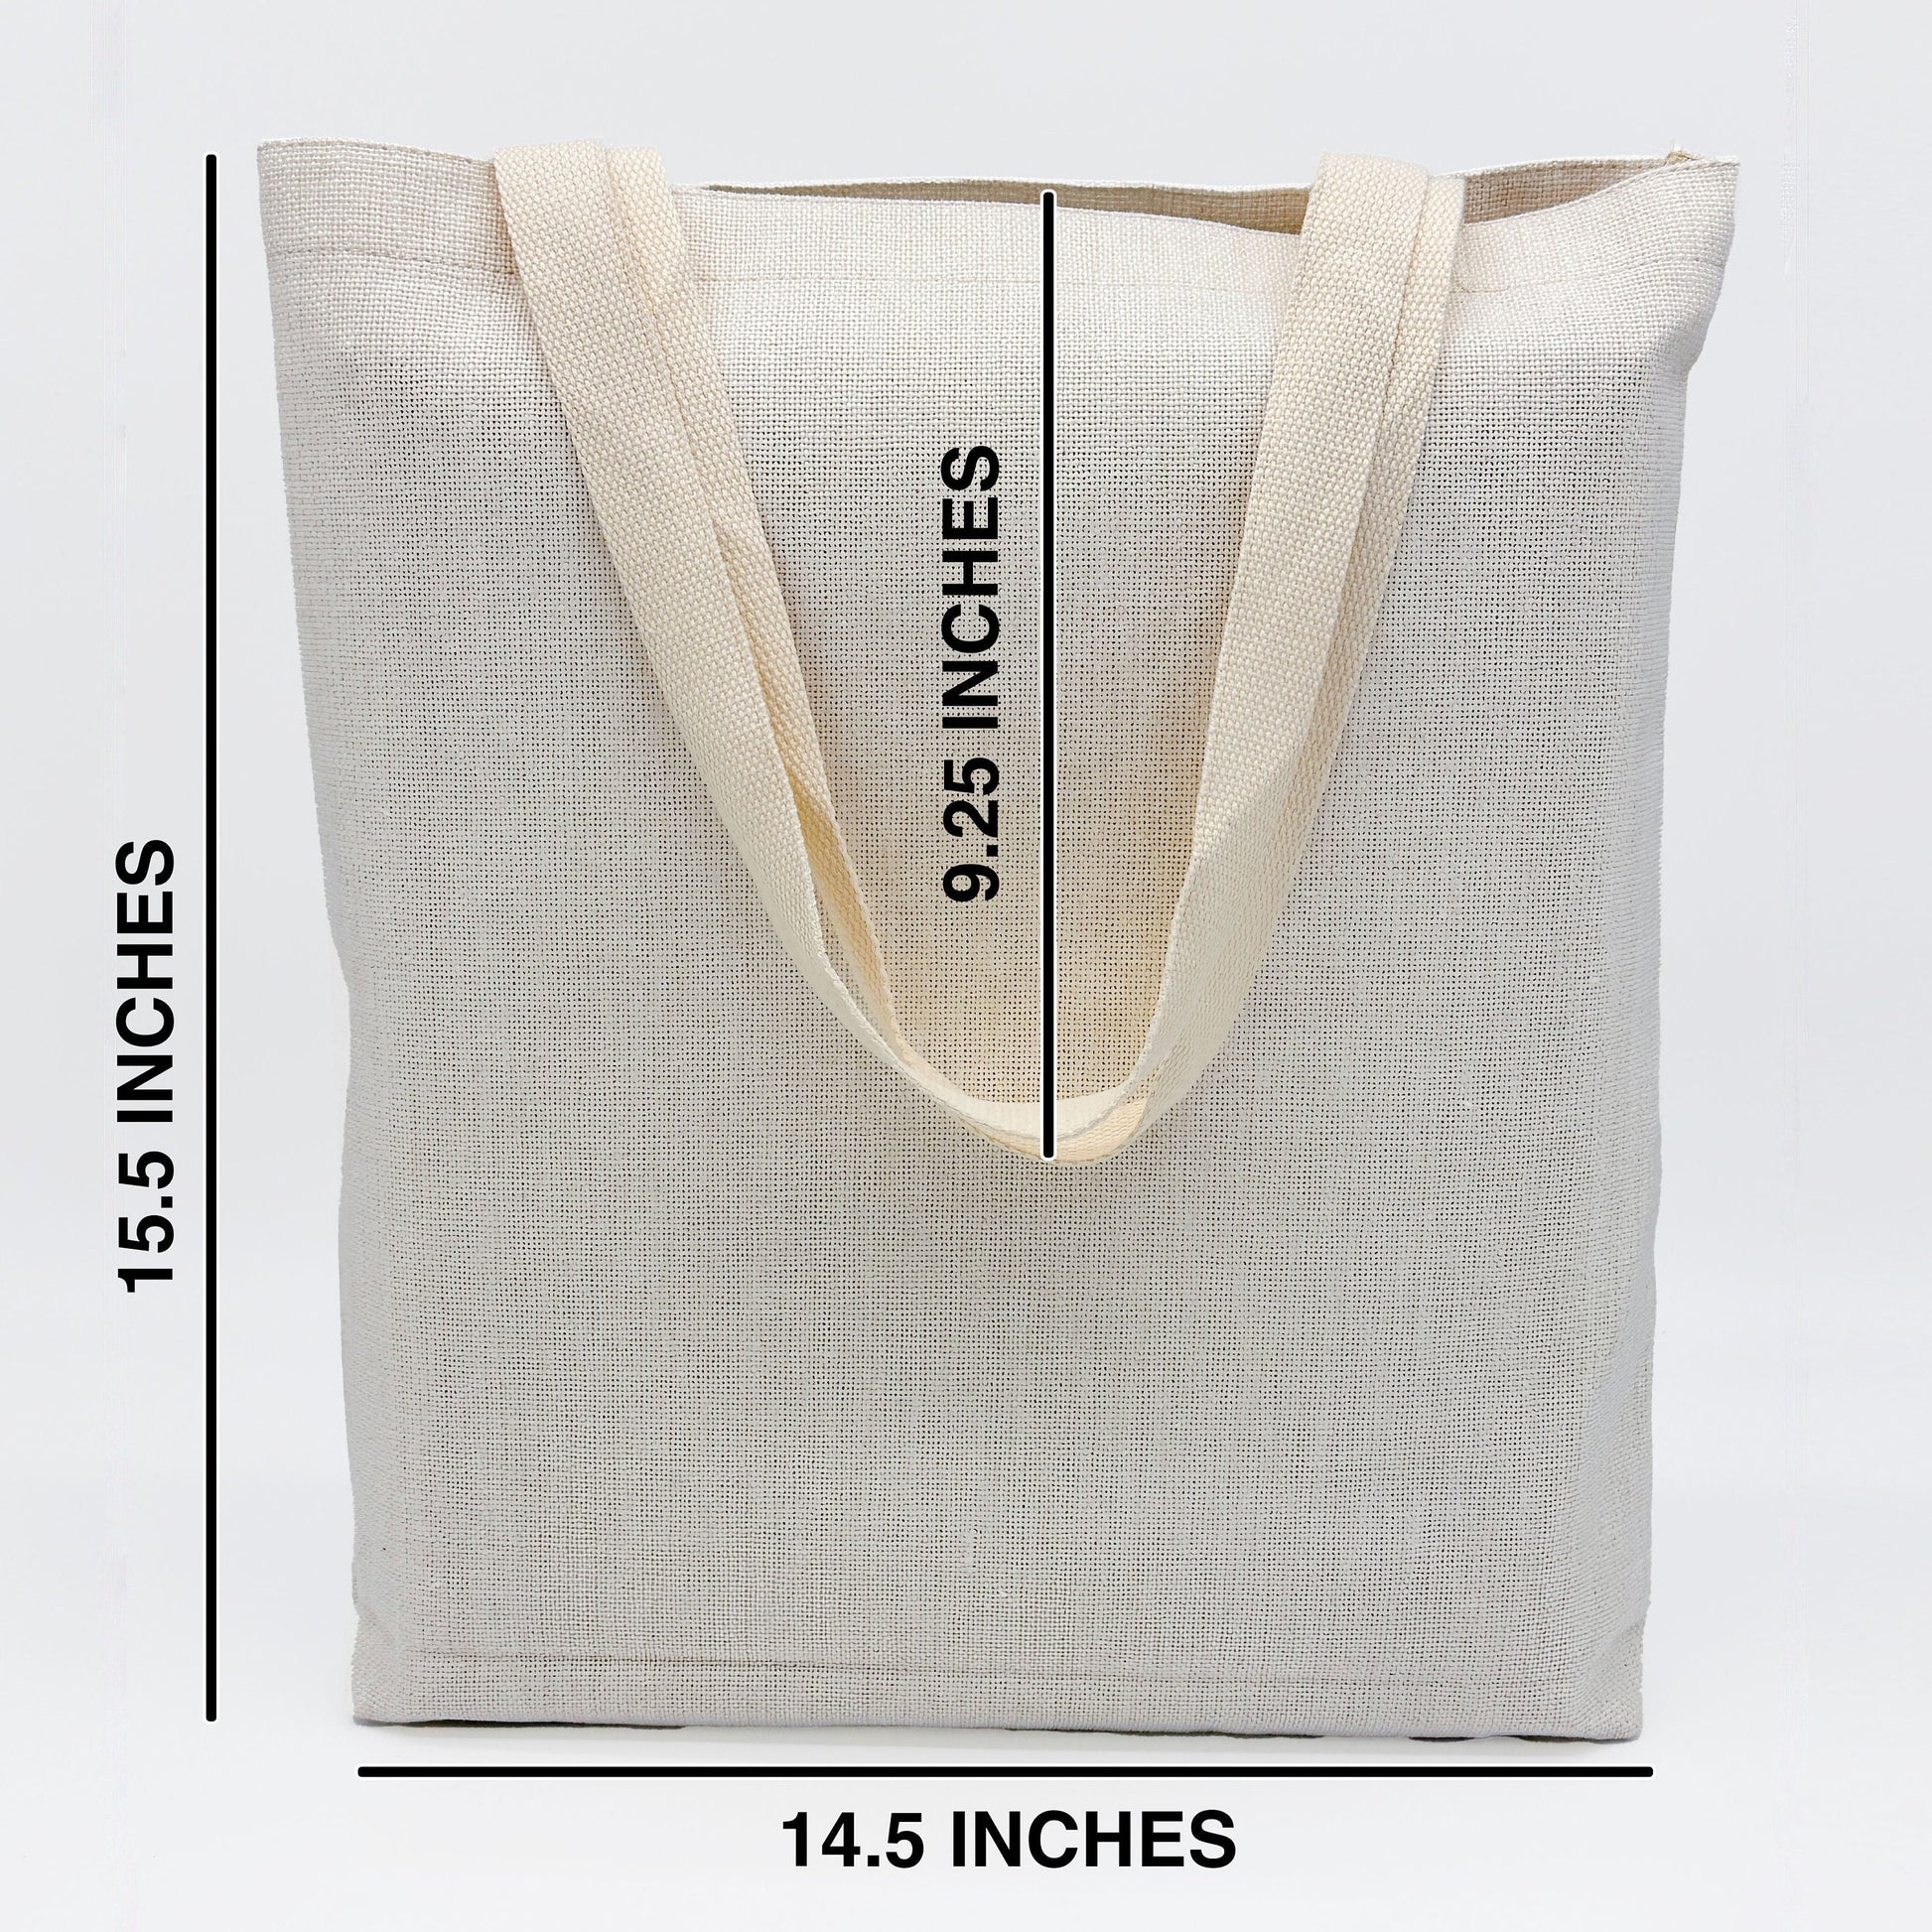 a tote bag size guide for a tote bag